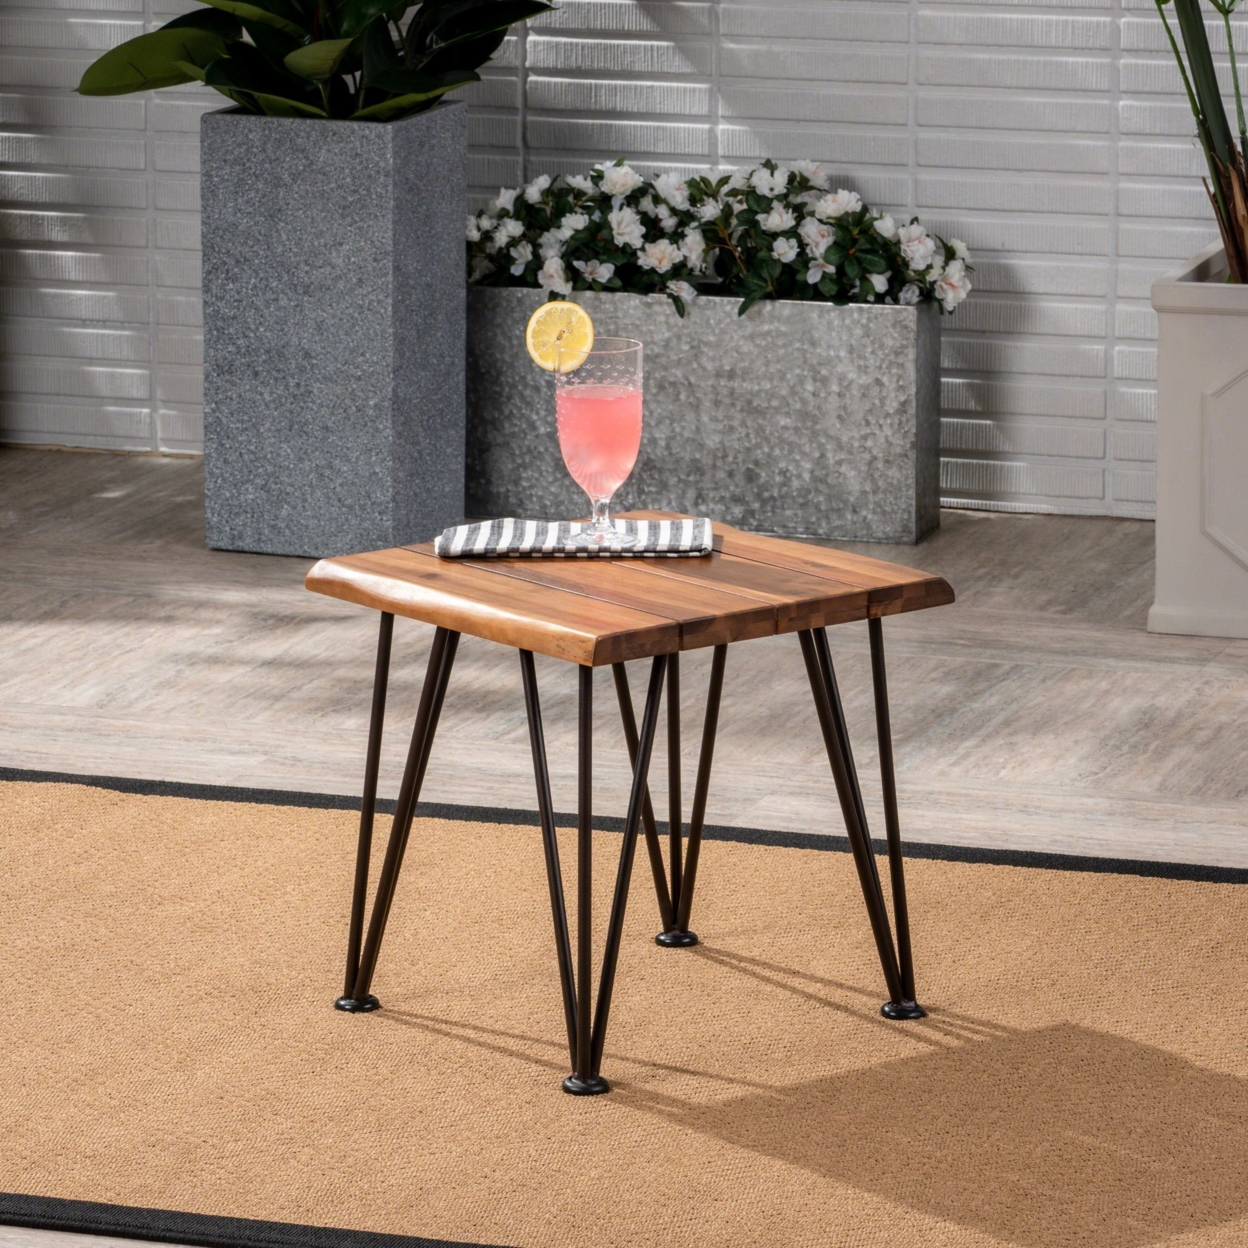 Zahir Outdoor Rustic Industrial Acacia Wood Accent Table With Metal Hairpin Legs - Teak, Single